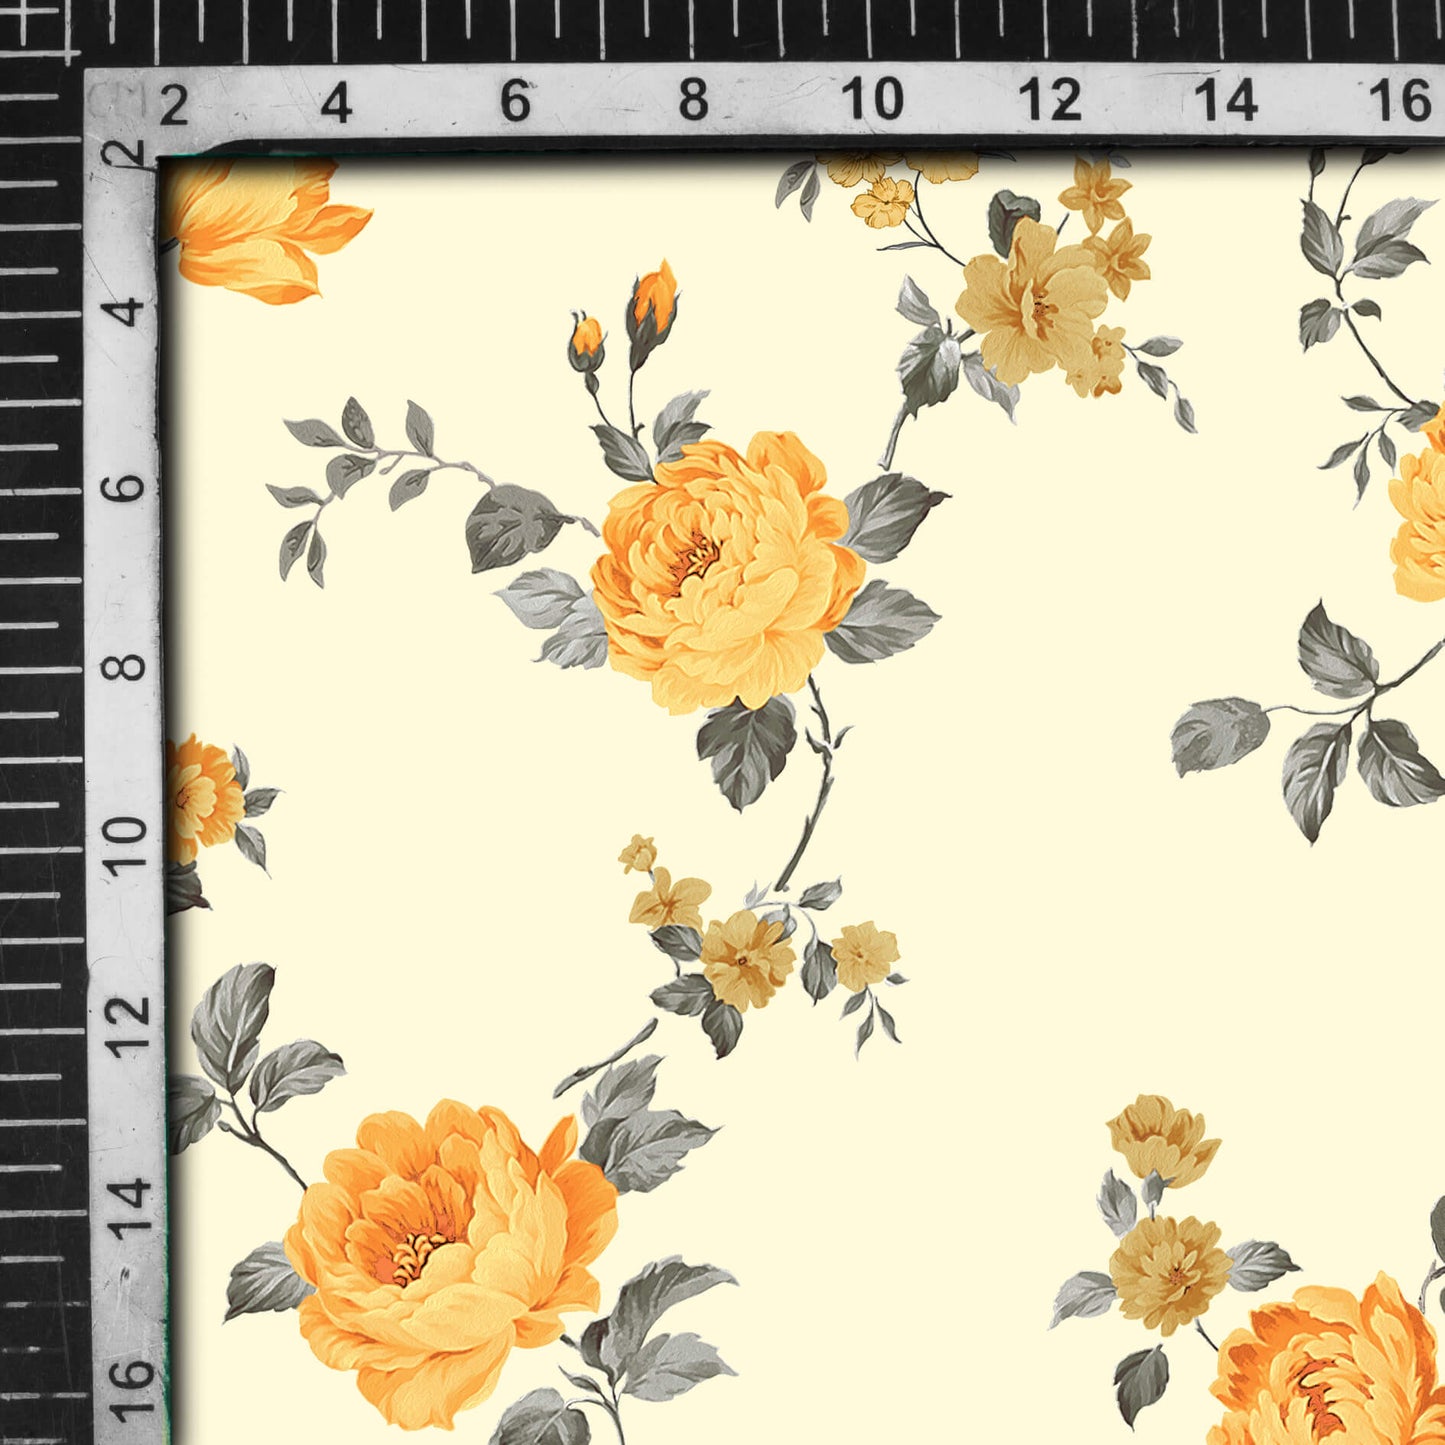 Jit's Choice Ivory Cream And Flex Yellow Floral Pattern Digital Print Rayon Fabric - Fabcurate